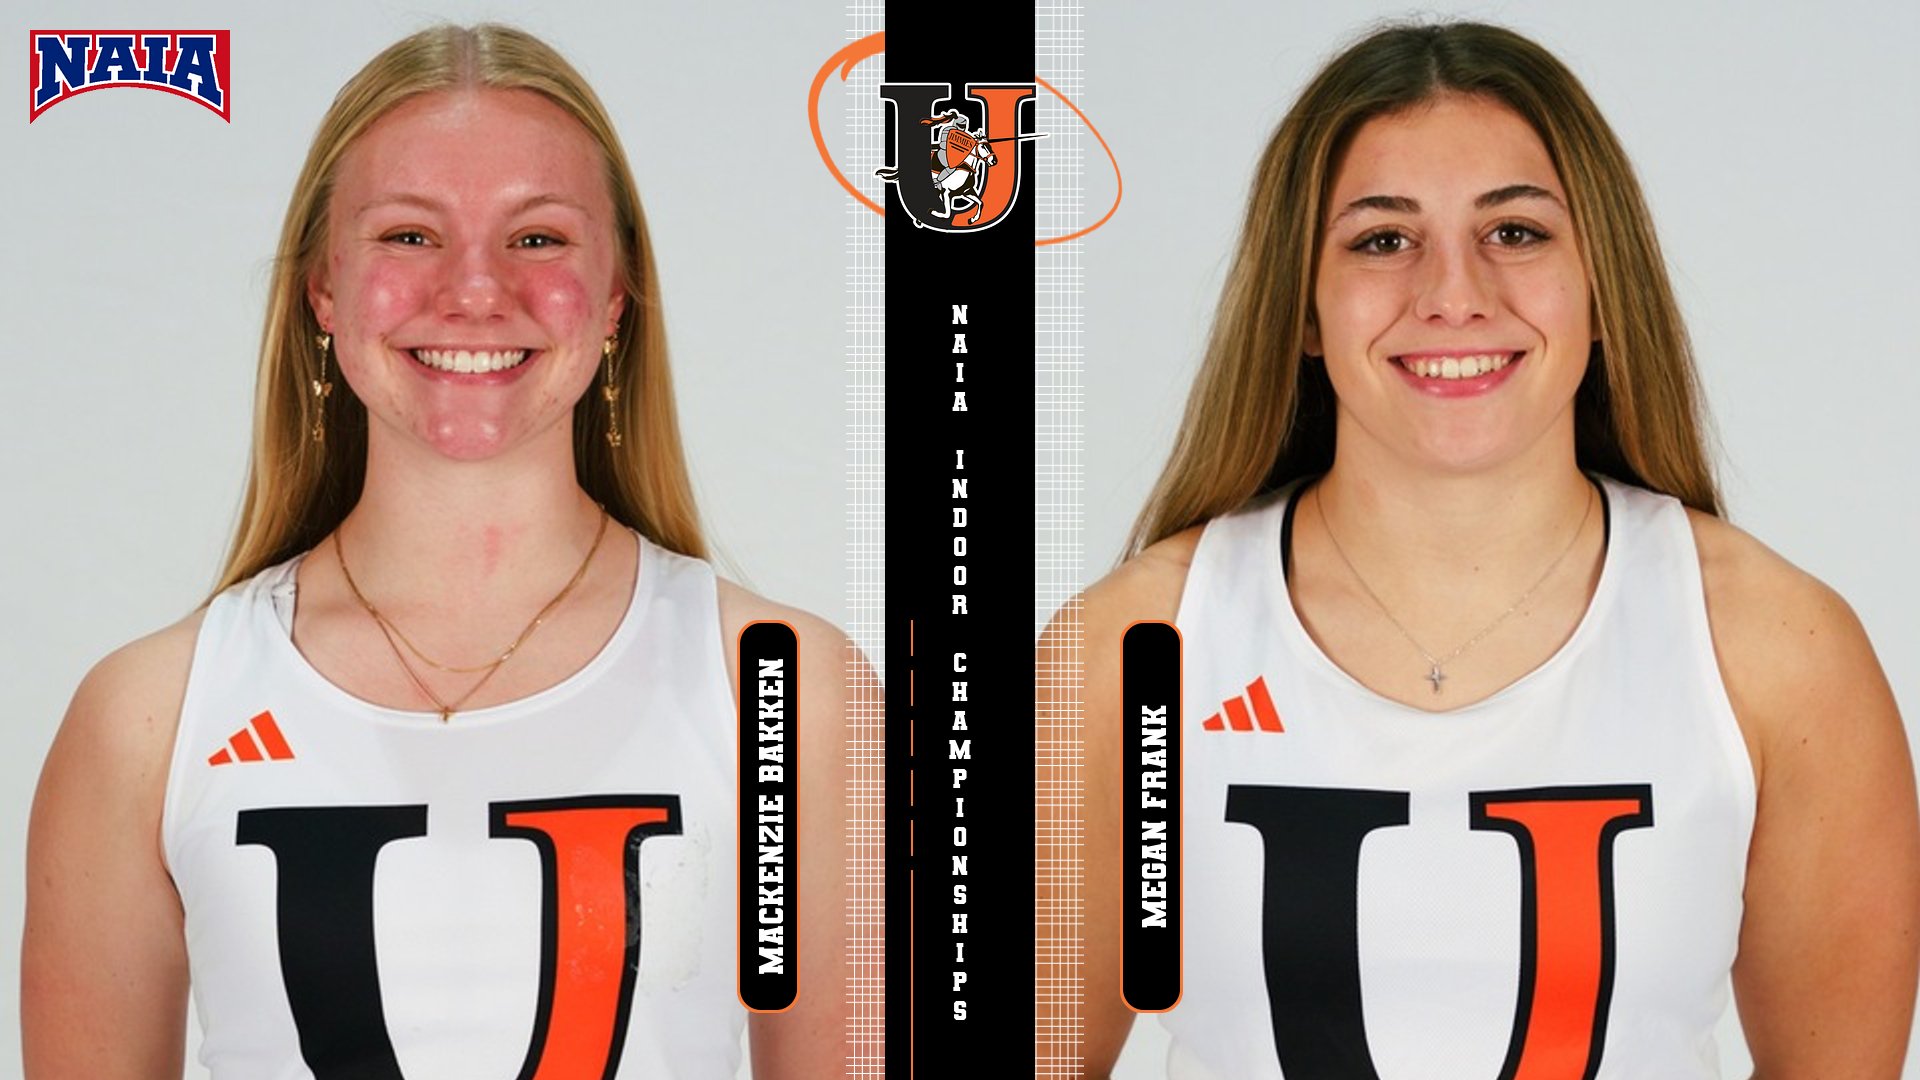 Bakken and Frank represent UJ women's track and field at NAIA Indoor Championships